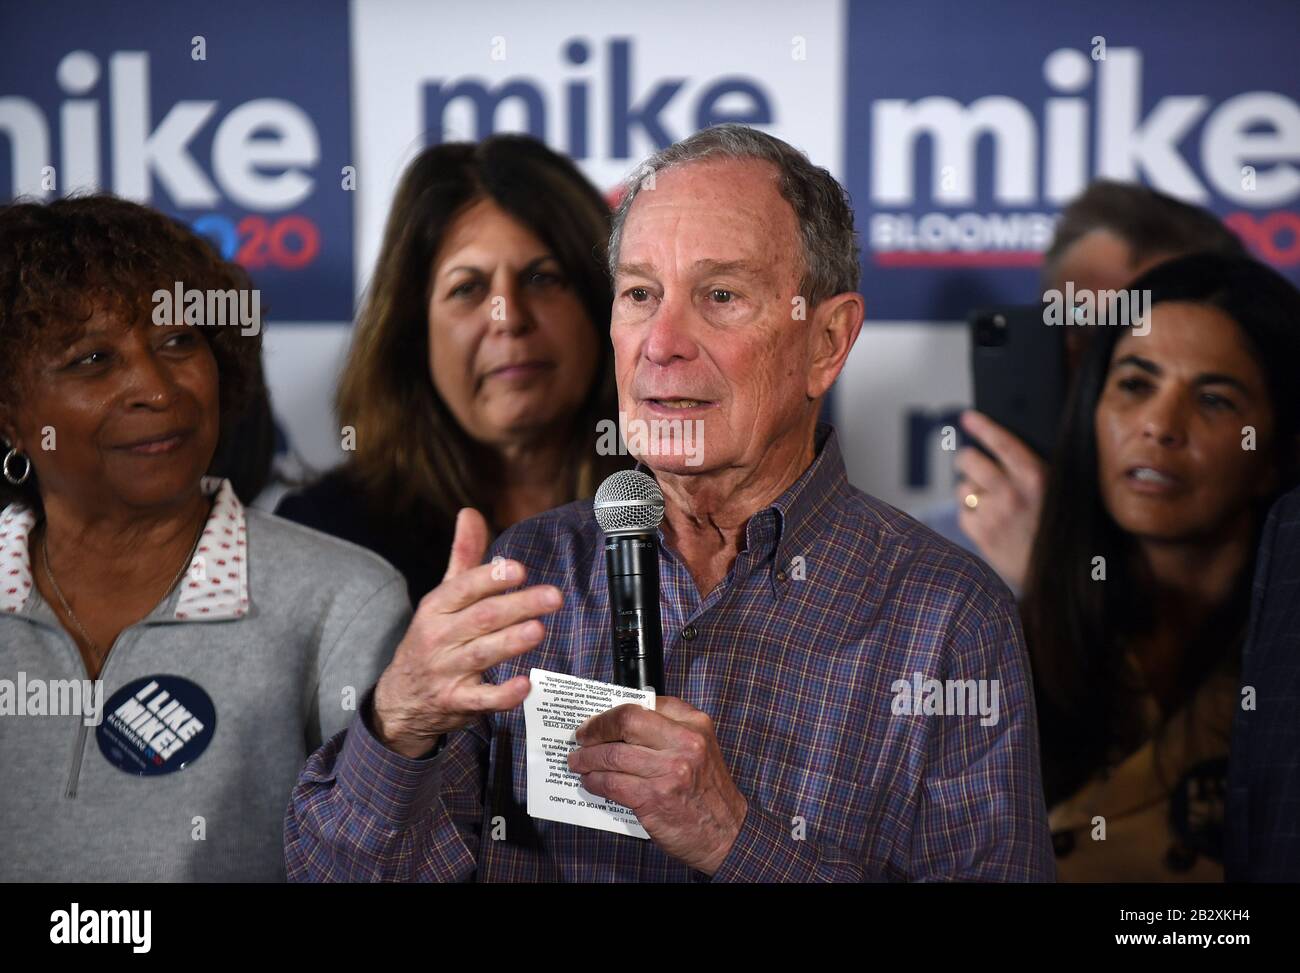 Orlando, Florida, USA. 03rd Mar, 2020. March 3, 2020 - Orlando, Florida, United States - Democratic presidential candidate former New York mayor Mike Bloomberg addresses supporters at a campaign stop at the Bloomberg campaign field office in Orlando, Florida on Super Tuesday, March 3, 2020. (Paul Hennessy/Alamy) Credit: Paul Hennessy/Alamy Live News Stock Photo